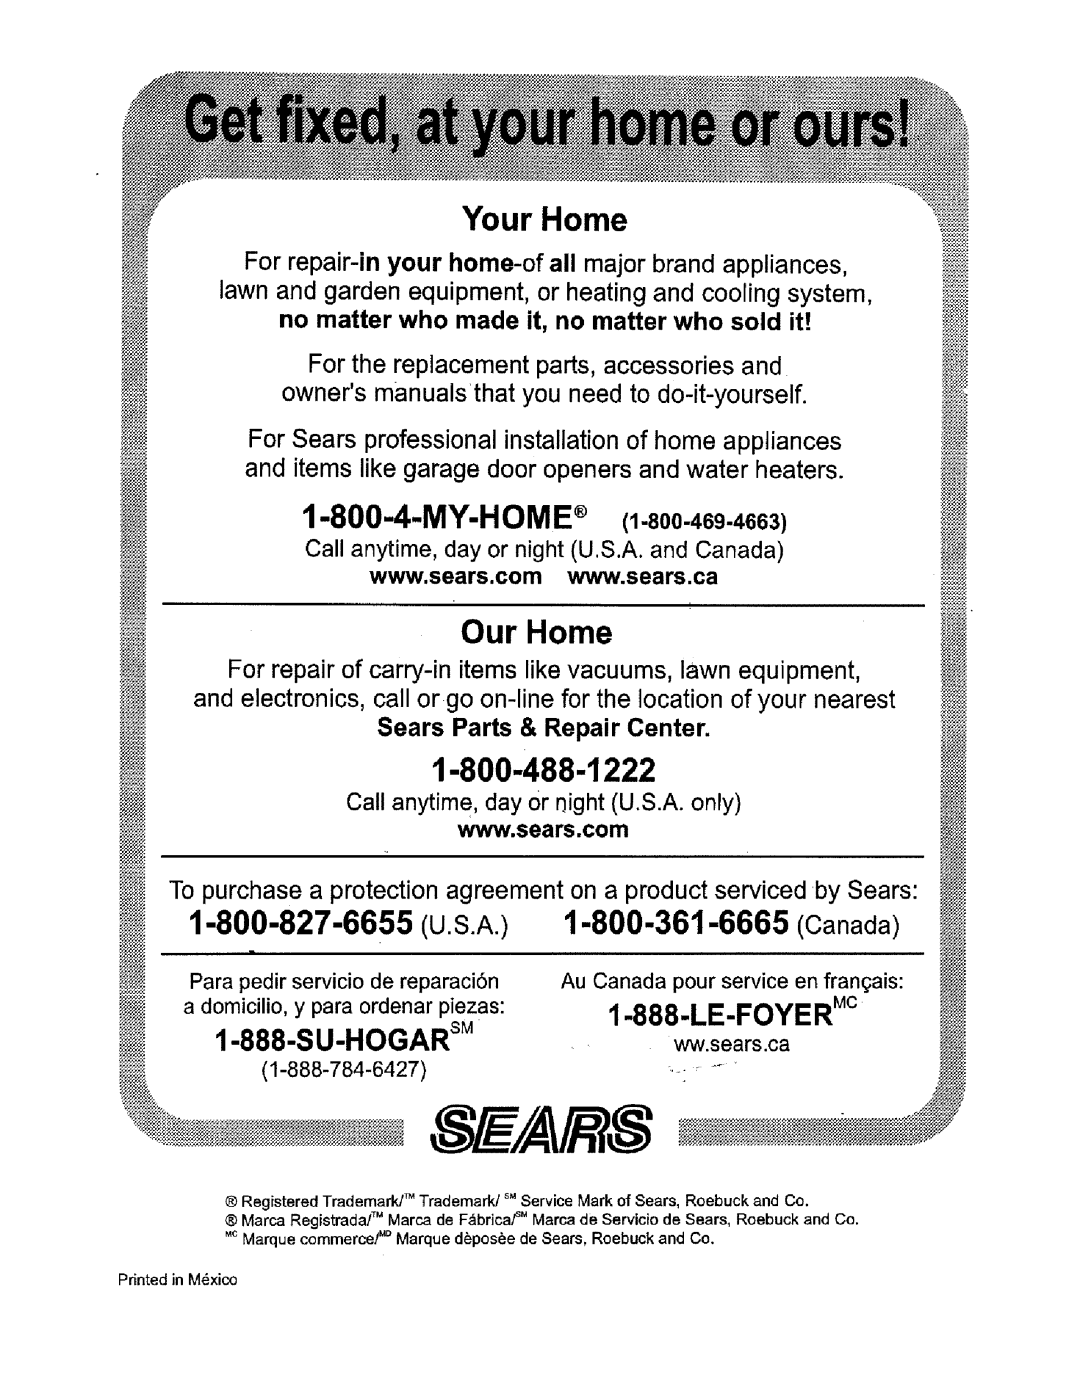 Kenmore 62042 owner manual Your Home, My-Home, Our Home, LE-FOYER Mc, Su-Hogar, ww.sears.ca 